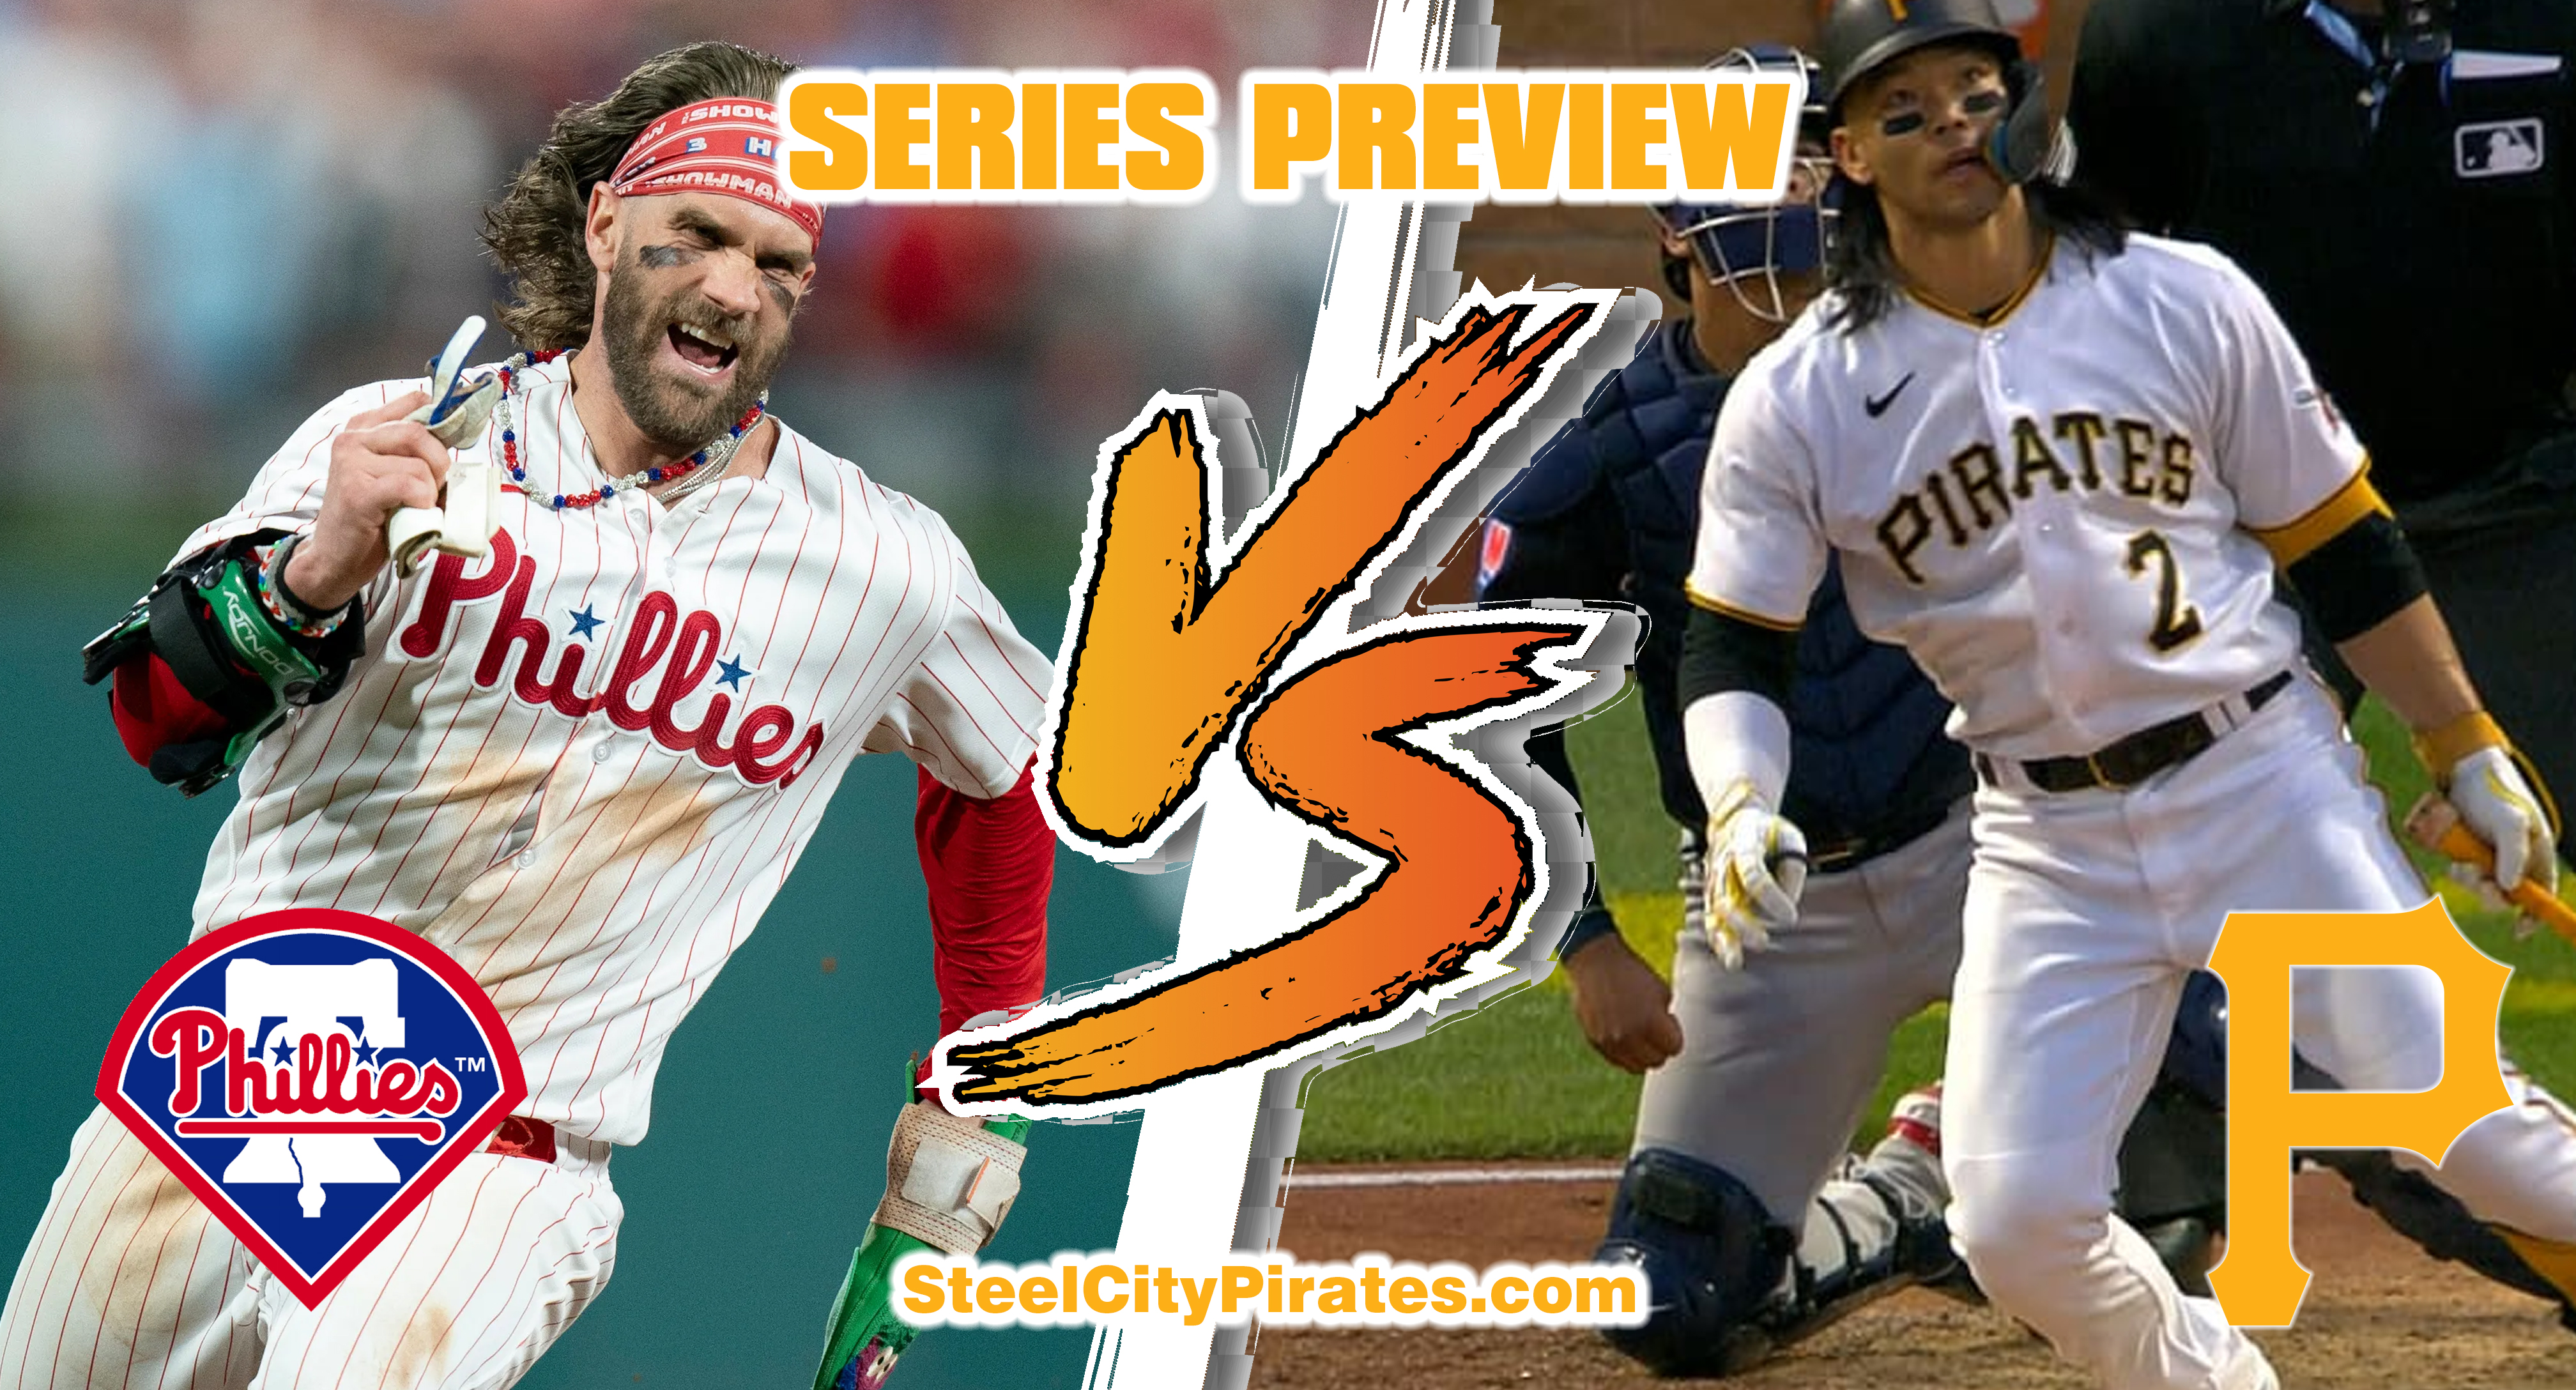 Series Preview: Pirates (9-3) at Phillies (6-6)